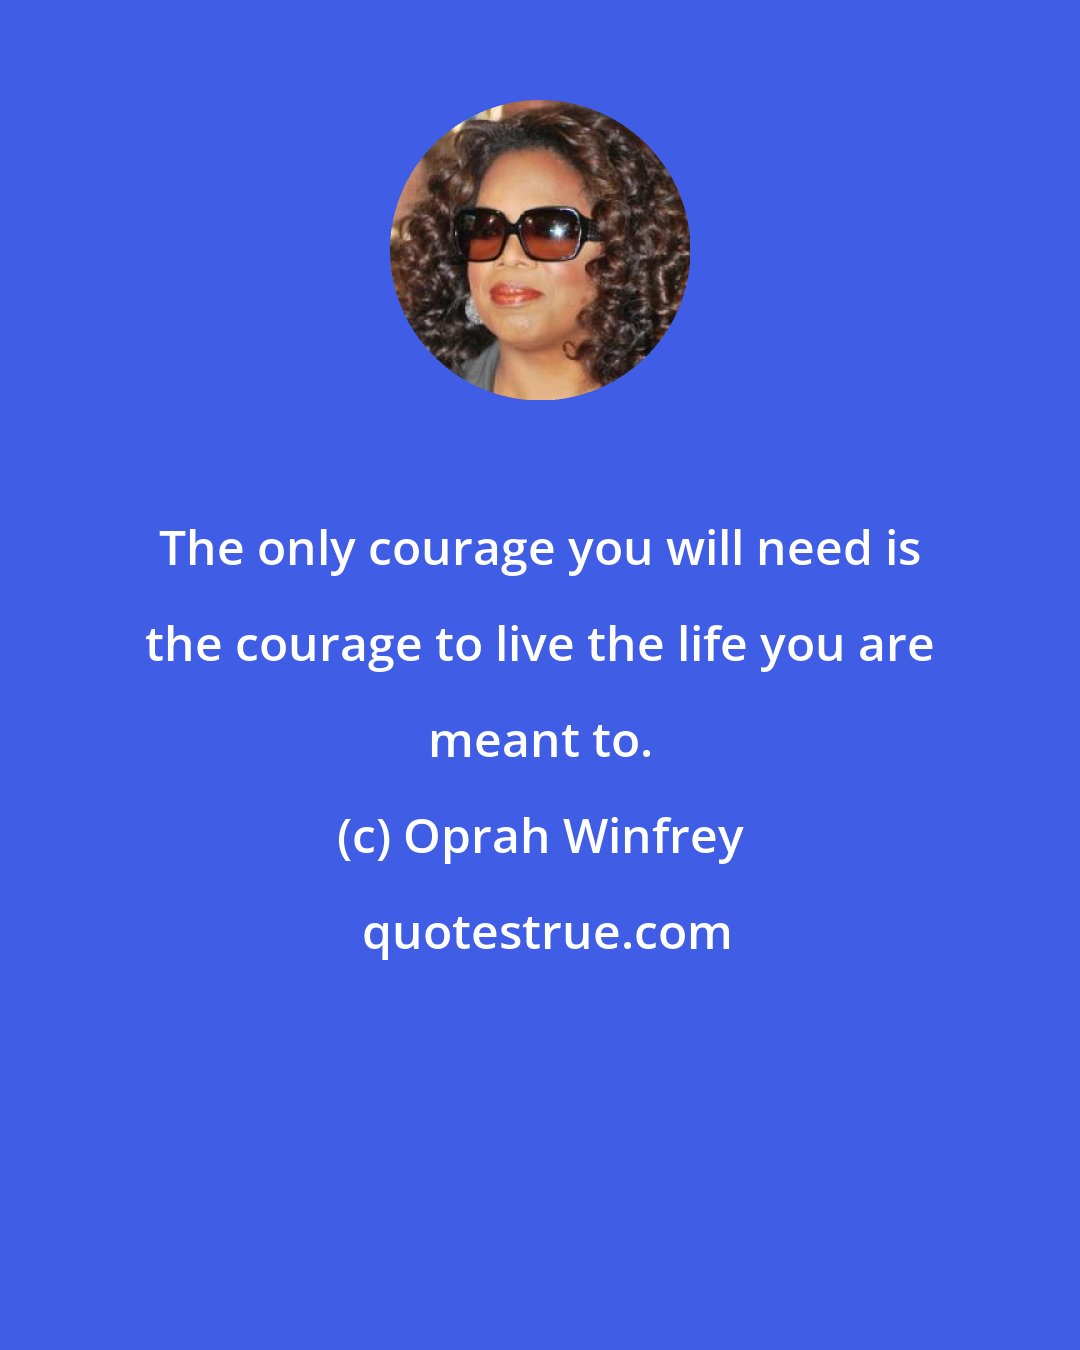 Oprah Winfrey: The only courage you will need is the courage to live the life you are meant to.